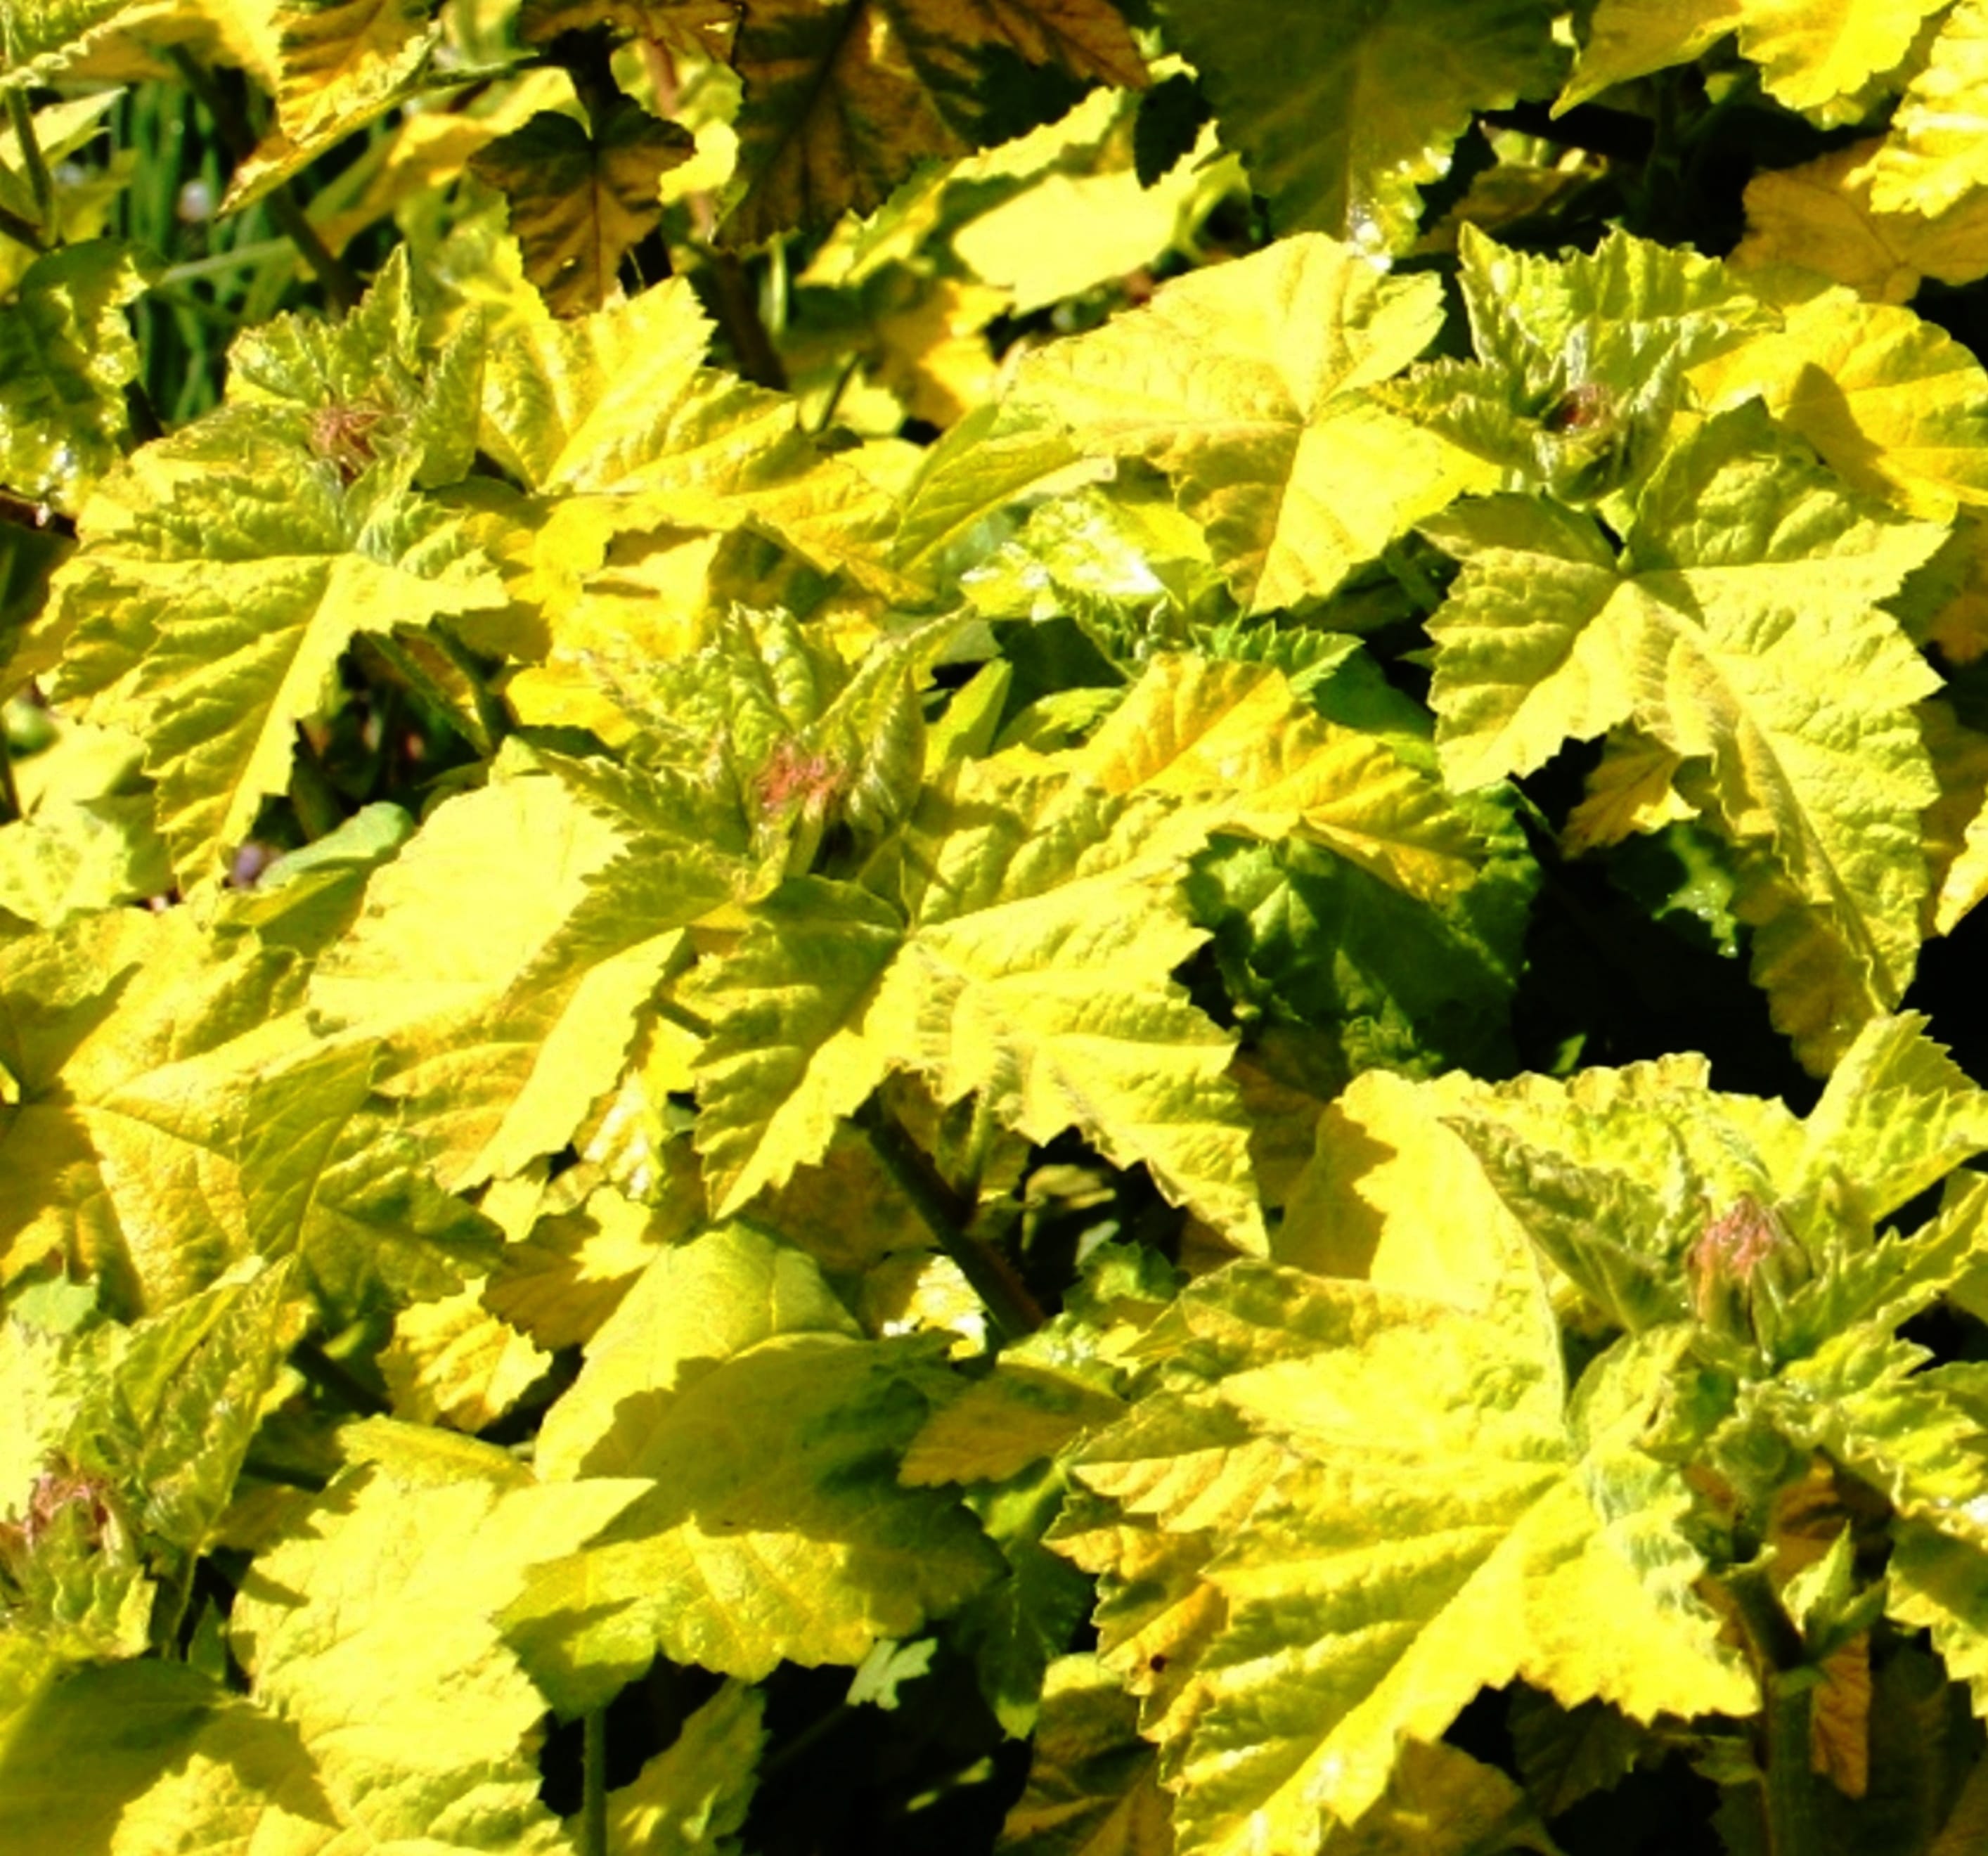 Lavatera &quot;aurea&quot; features singular, golden-green photosynthetic foliage that catches light in a mysterious and fascinating way.